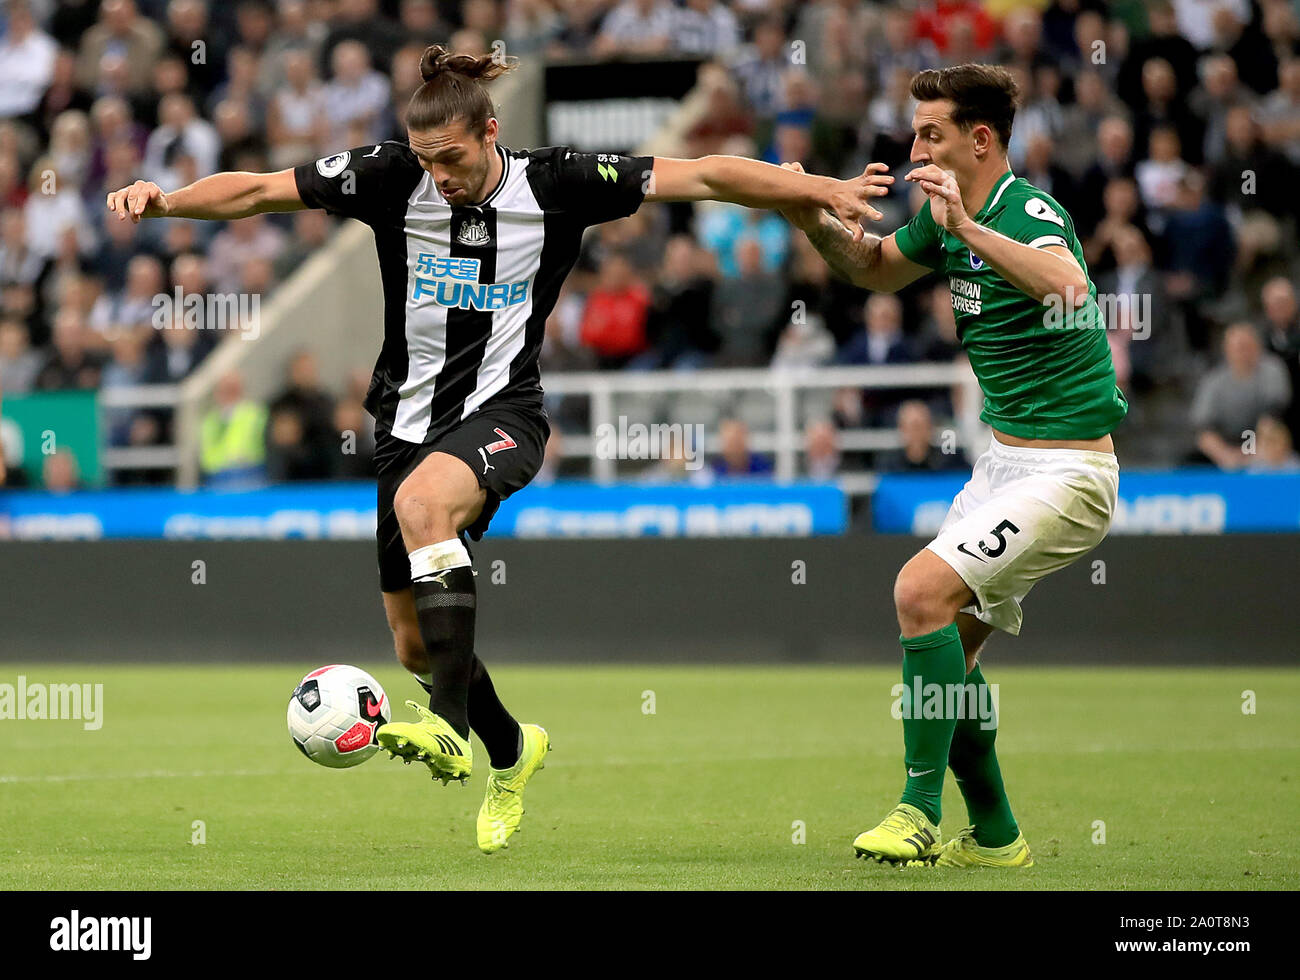 Newcastle United's Andy Carroll (left) and Brighton and Hove Albion's Lewis Dunk (right) battle for the ball during the Premier League match at St James' Park, Newcastle. Stock Photo